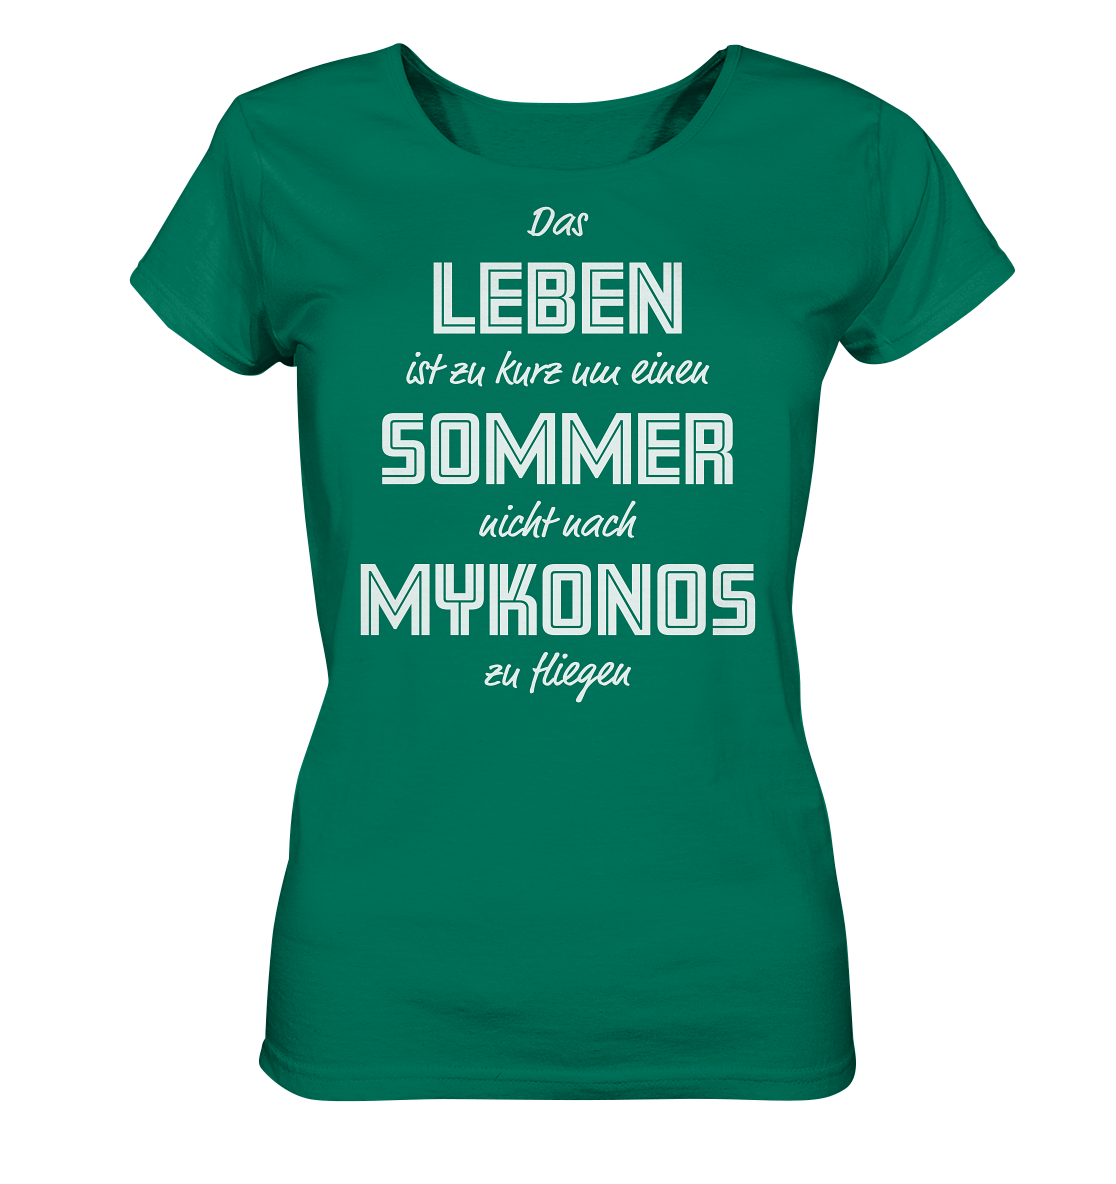 Life is too short not to fly to Mykonos for a summer - Ladies Organic Shirt